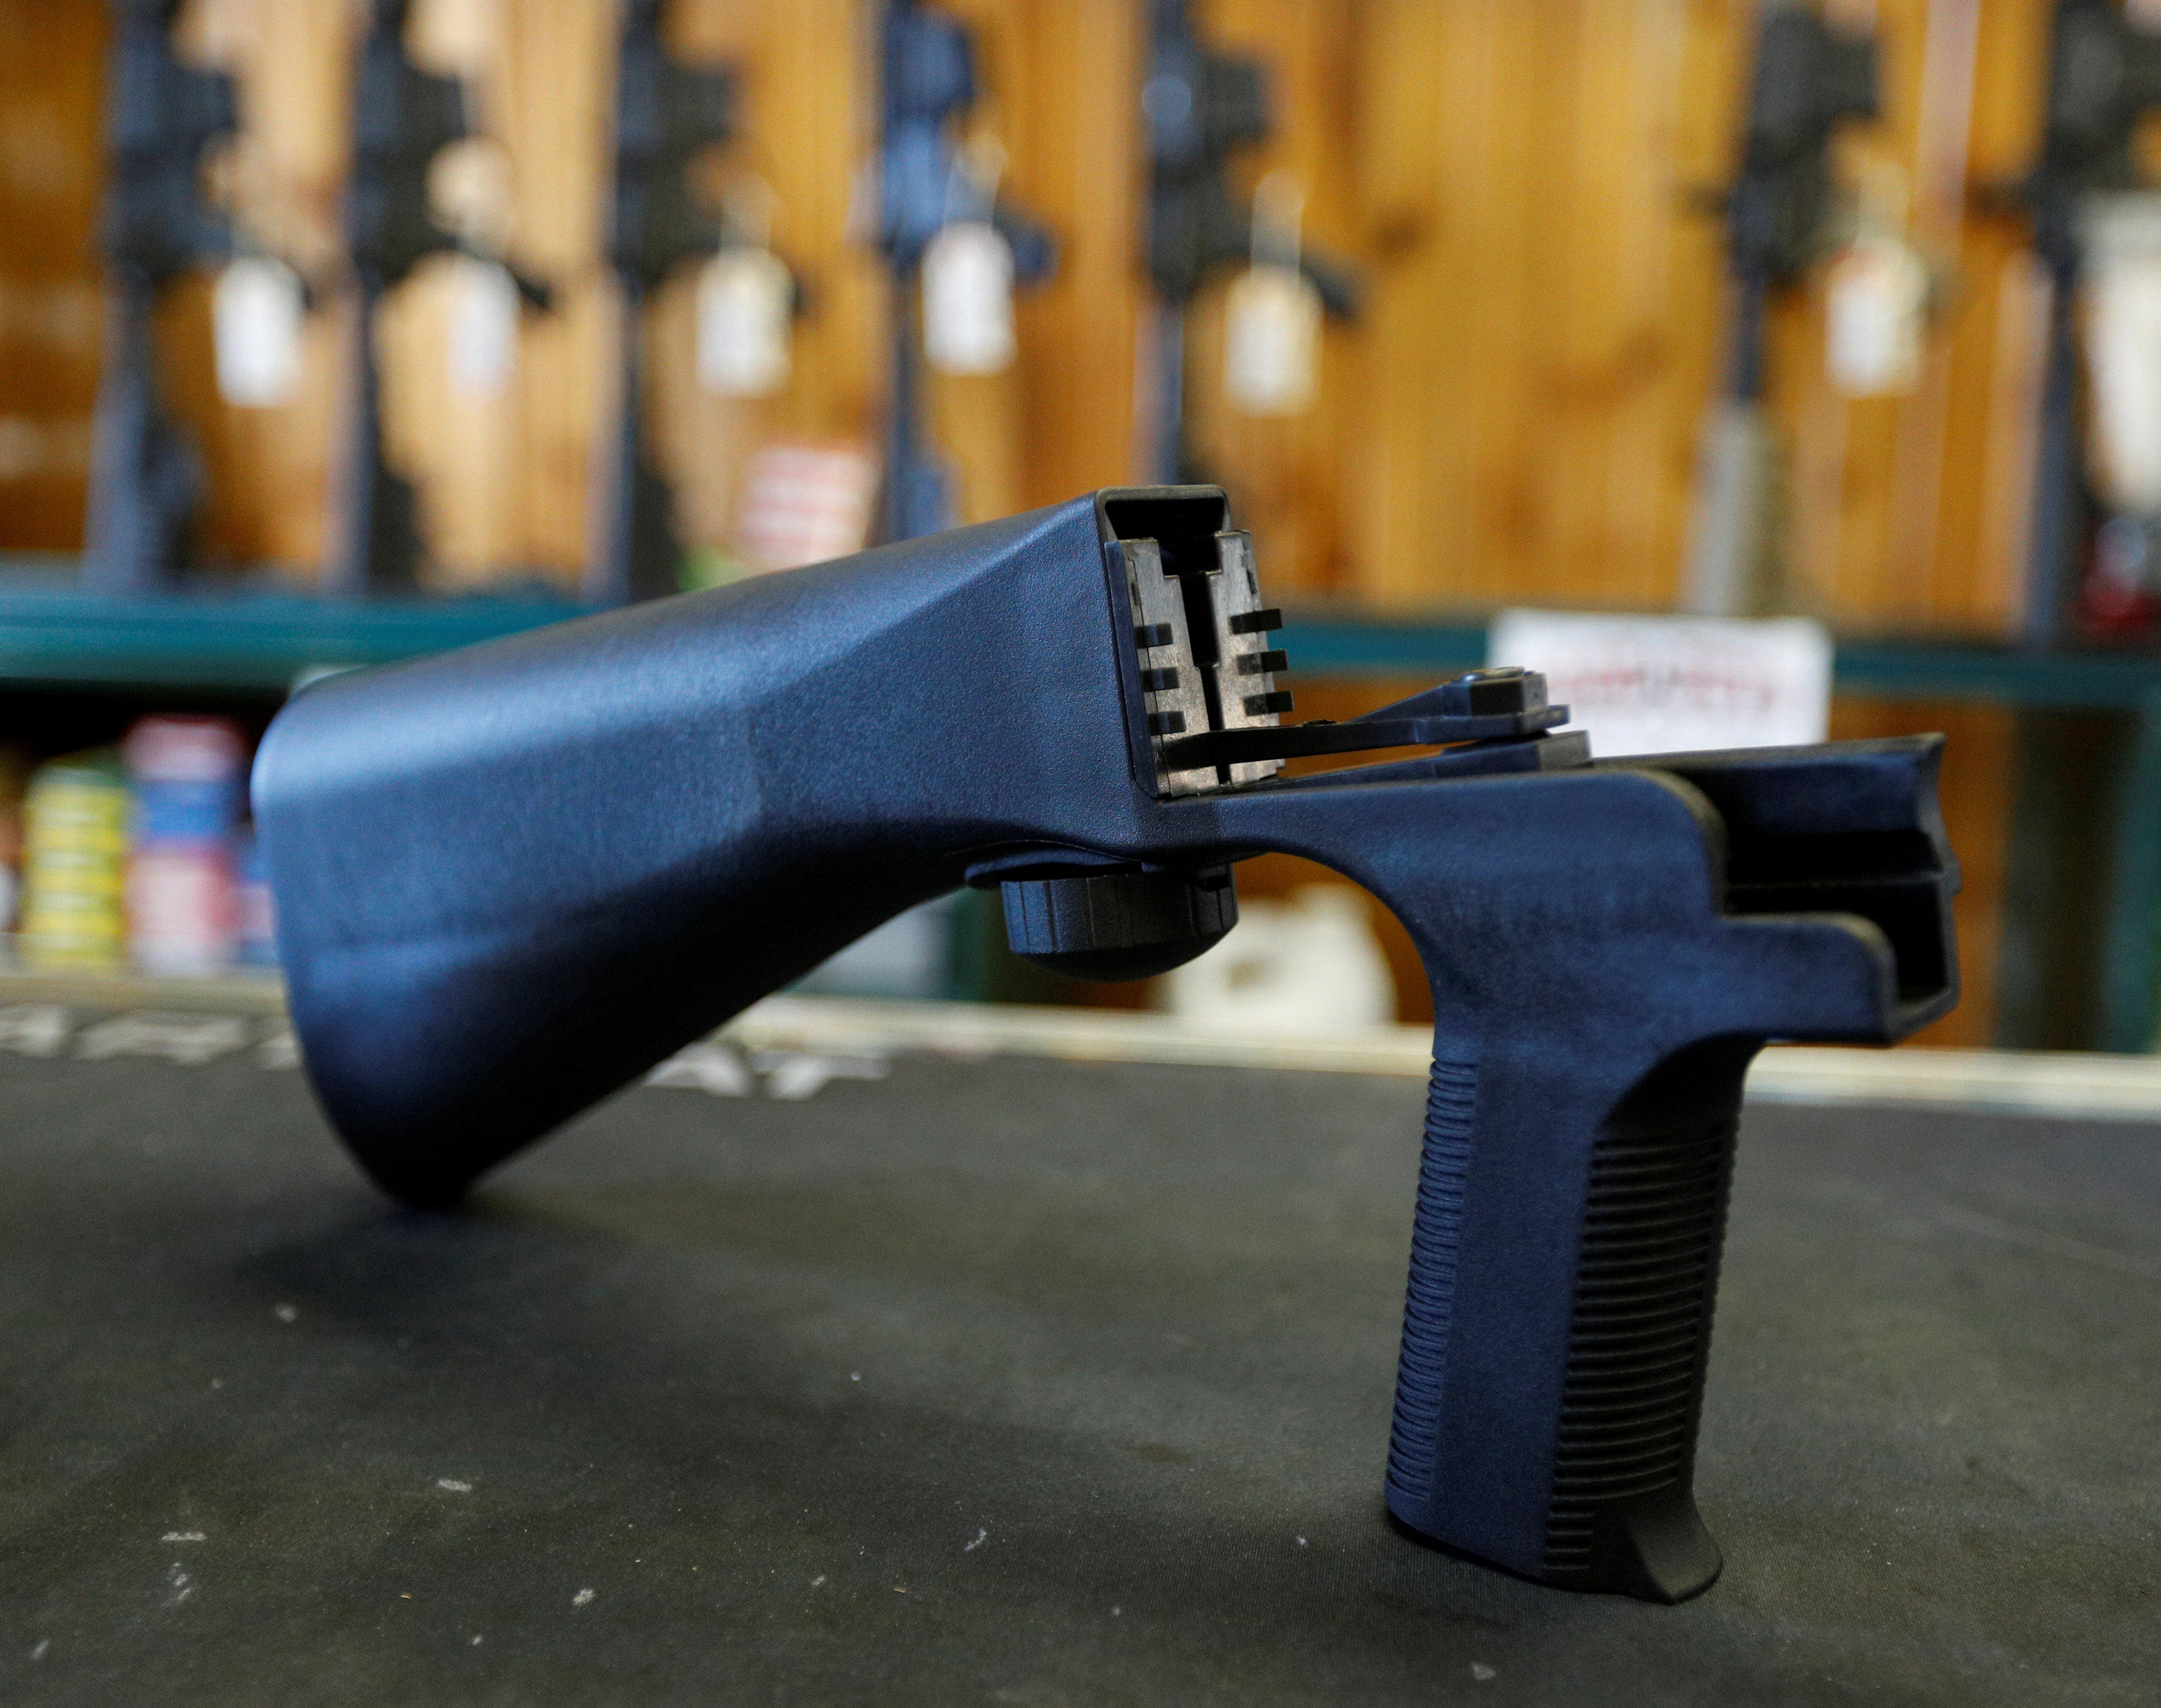 Trump may want to ban bump stocks, but ATF isn't sure it can - CBS News